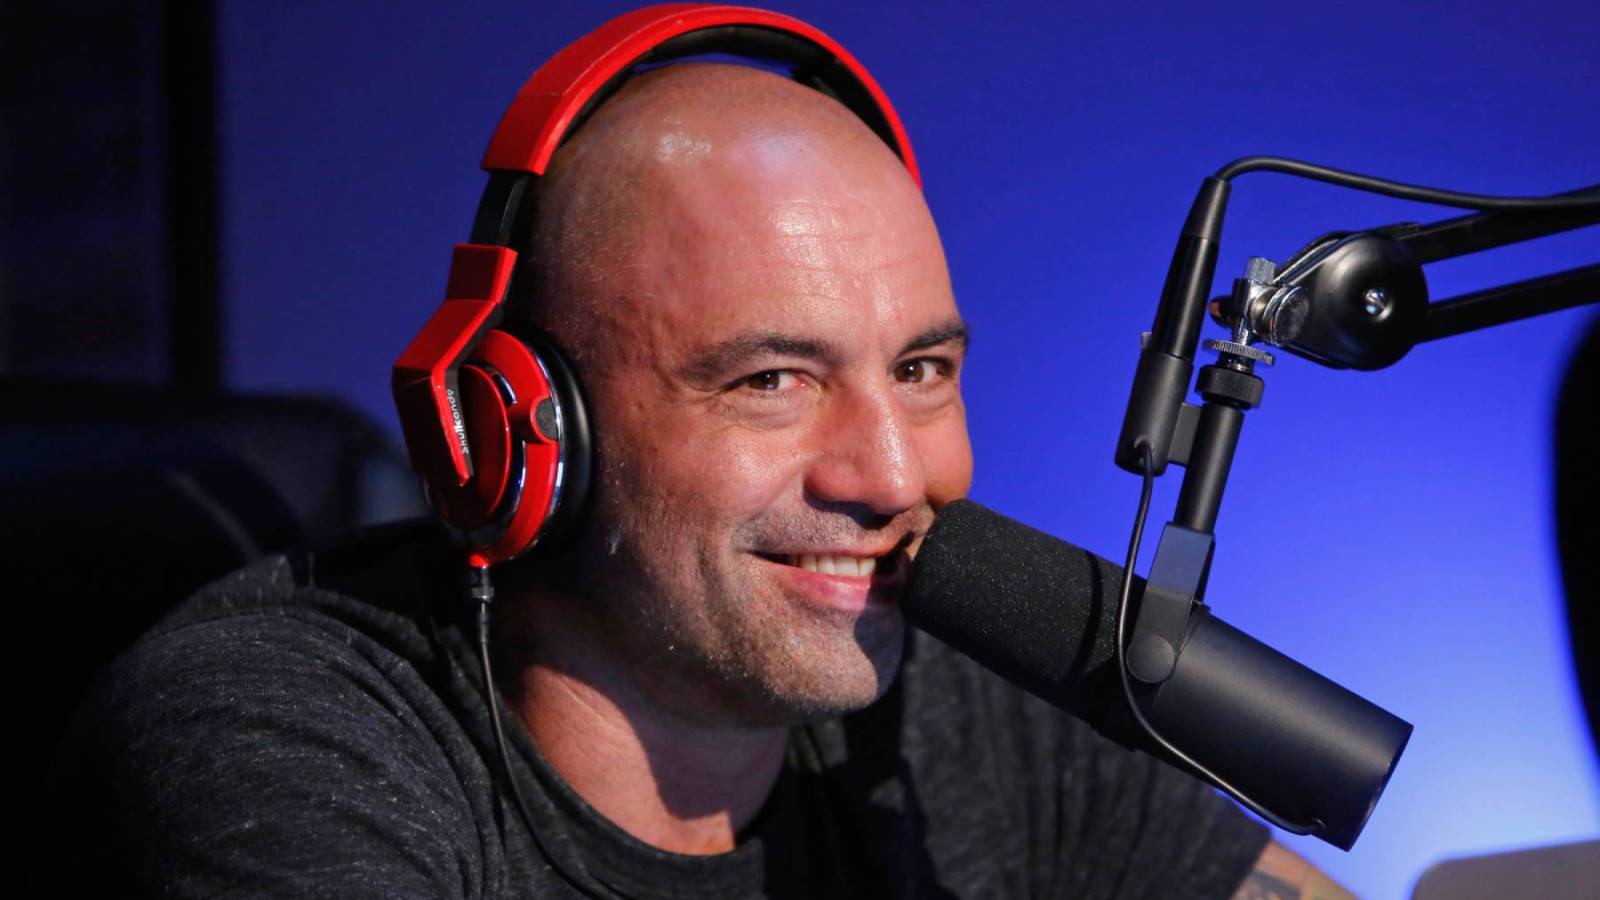 Joe Rogan Clinches New Spotify Deal Worth Up to $250 Million